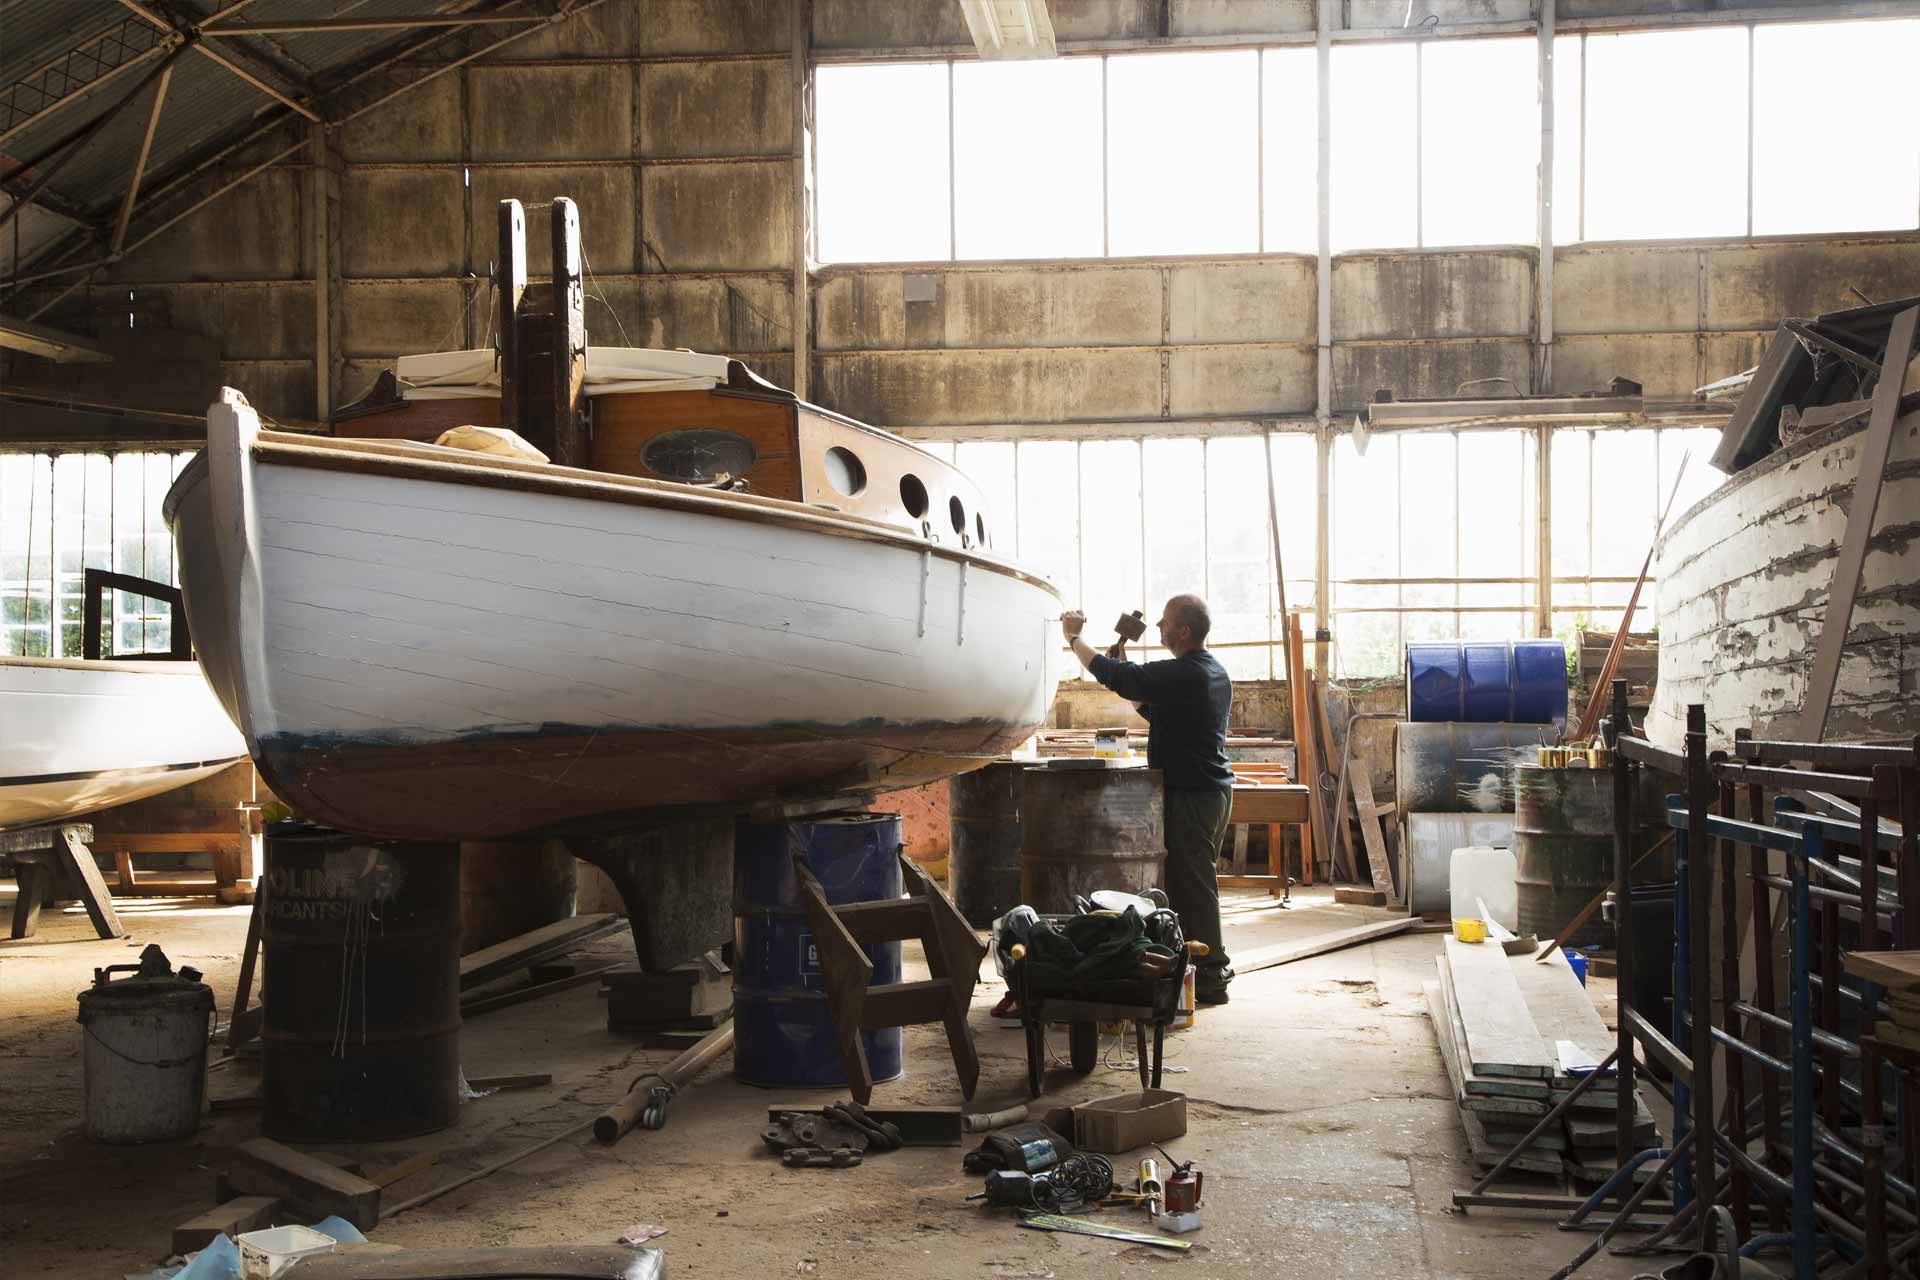 A man builds a boat on his own